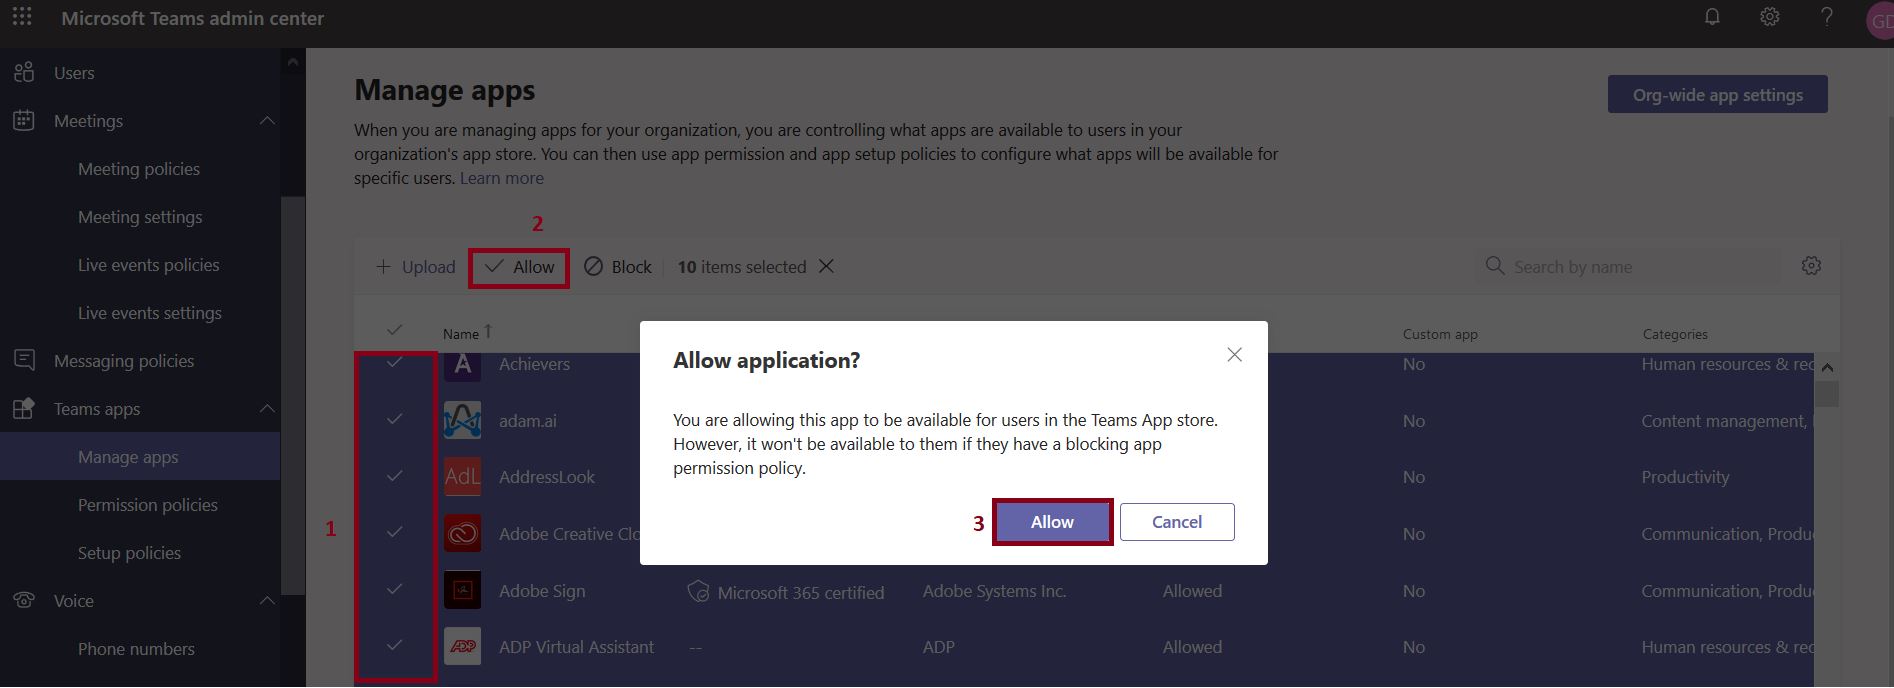 Manage apps in Microsoft Teams, how to allow the app to be available for users in the Teams App store?